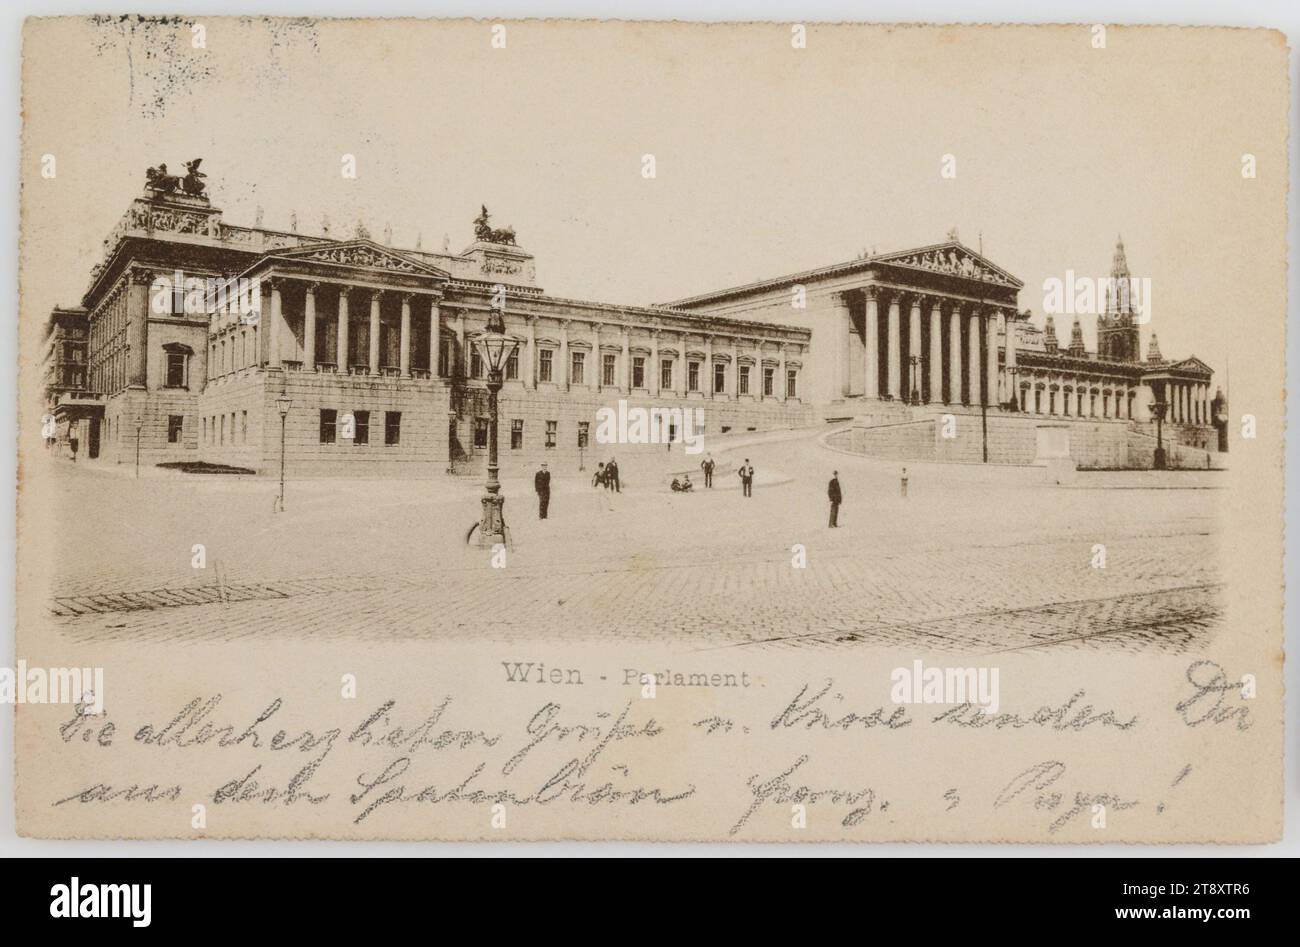 Vienna - Parliament, Unknown, 1898, paperboard, Collotype, Inscription, FROM, Vienna, TO, Scheibbs N.Ö., ADDRESS, Fräulein, [name], Scheibbs, N.Ö., MESSAGE, The warmest greetings and kisses send you from the Spatenbräu Franz u Papa !, Attractions, Ringstraße, Law and Justice, Media and Communication, Postcards with transliteration, 1st District: Innere Stadt, street lighting, with people, townhall, parliament, Parlament Wien, handwriting, written text, Dr.-Karl-Renner-Ring, The Vienna Collection Stock Photo